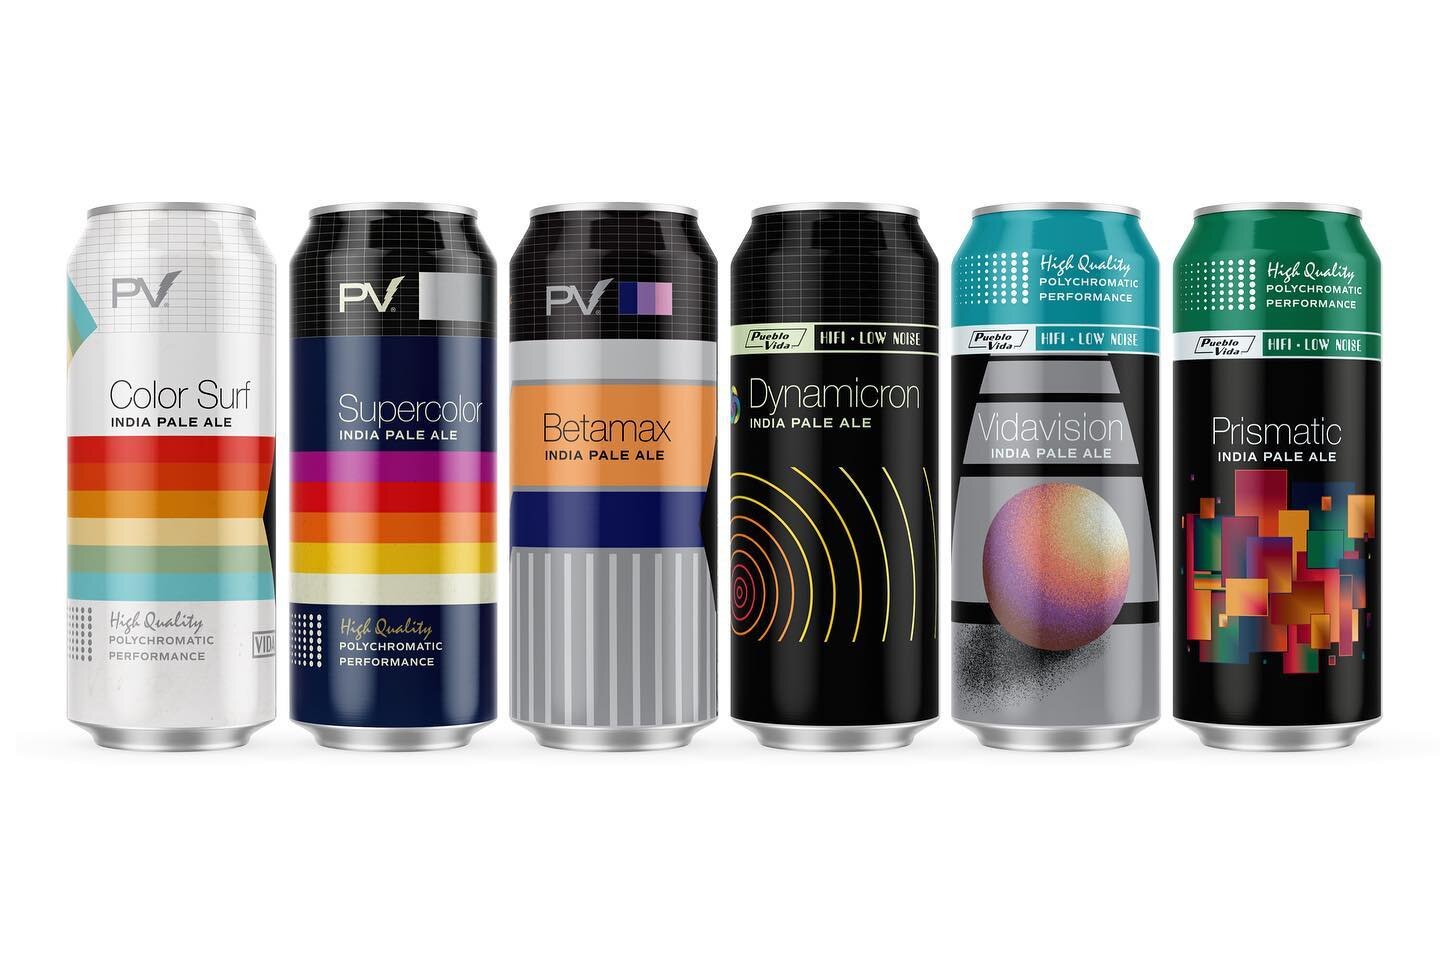 SWIPE ➡️
Another set we have been running with at @pueblovida are inspired by old VHS, cassette and Betamax designs. These beers are all IPA versions of their anniversary DIPAs, so the color palette for each can corresponds to the related anniversary